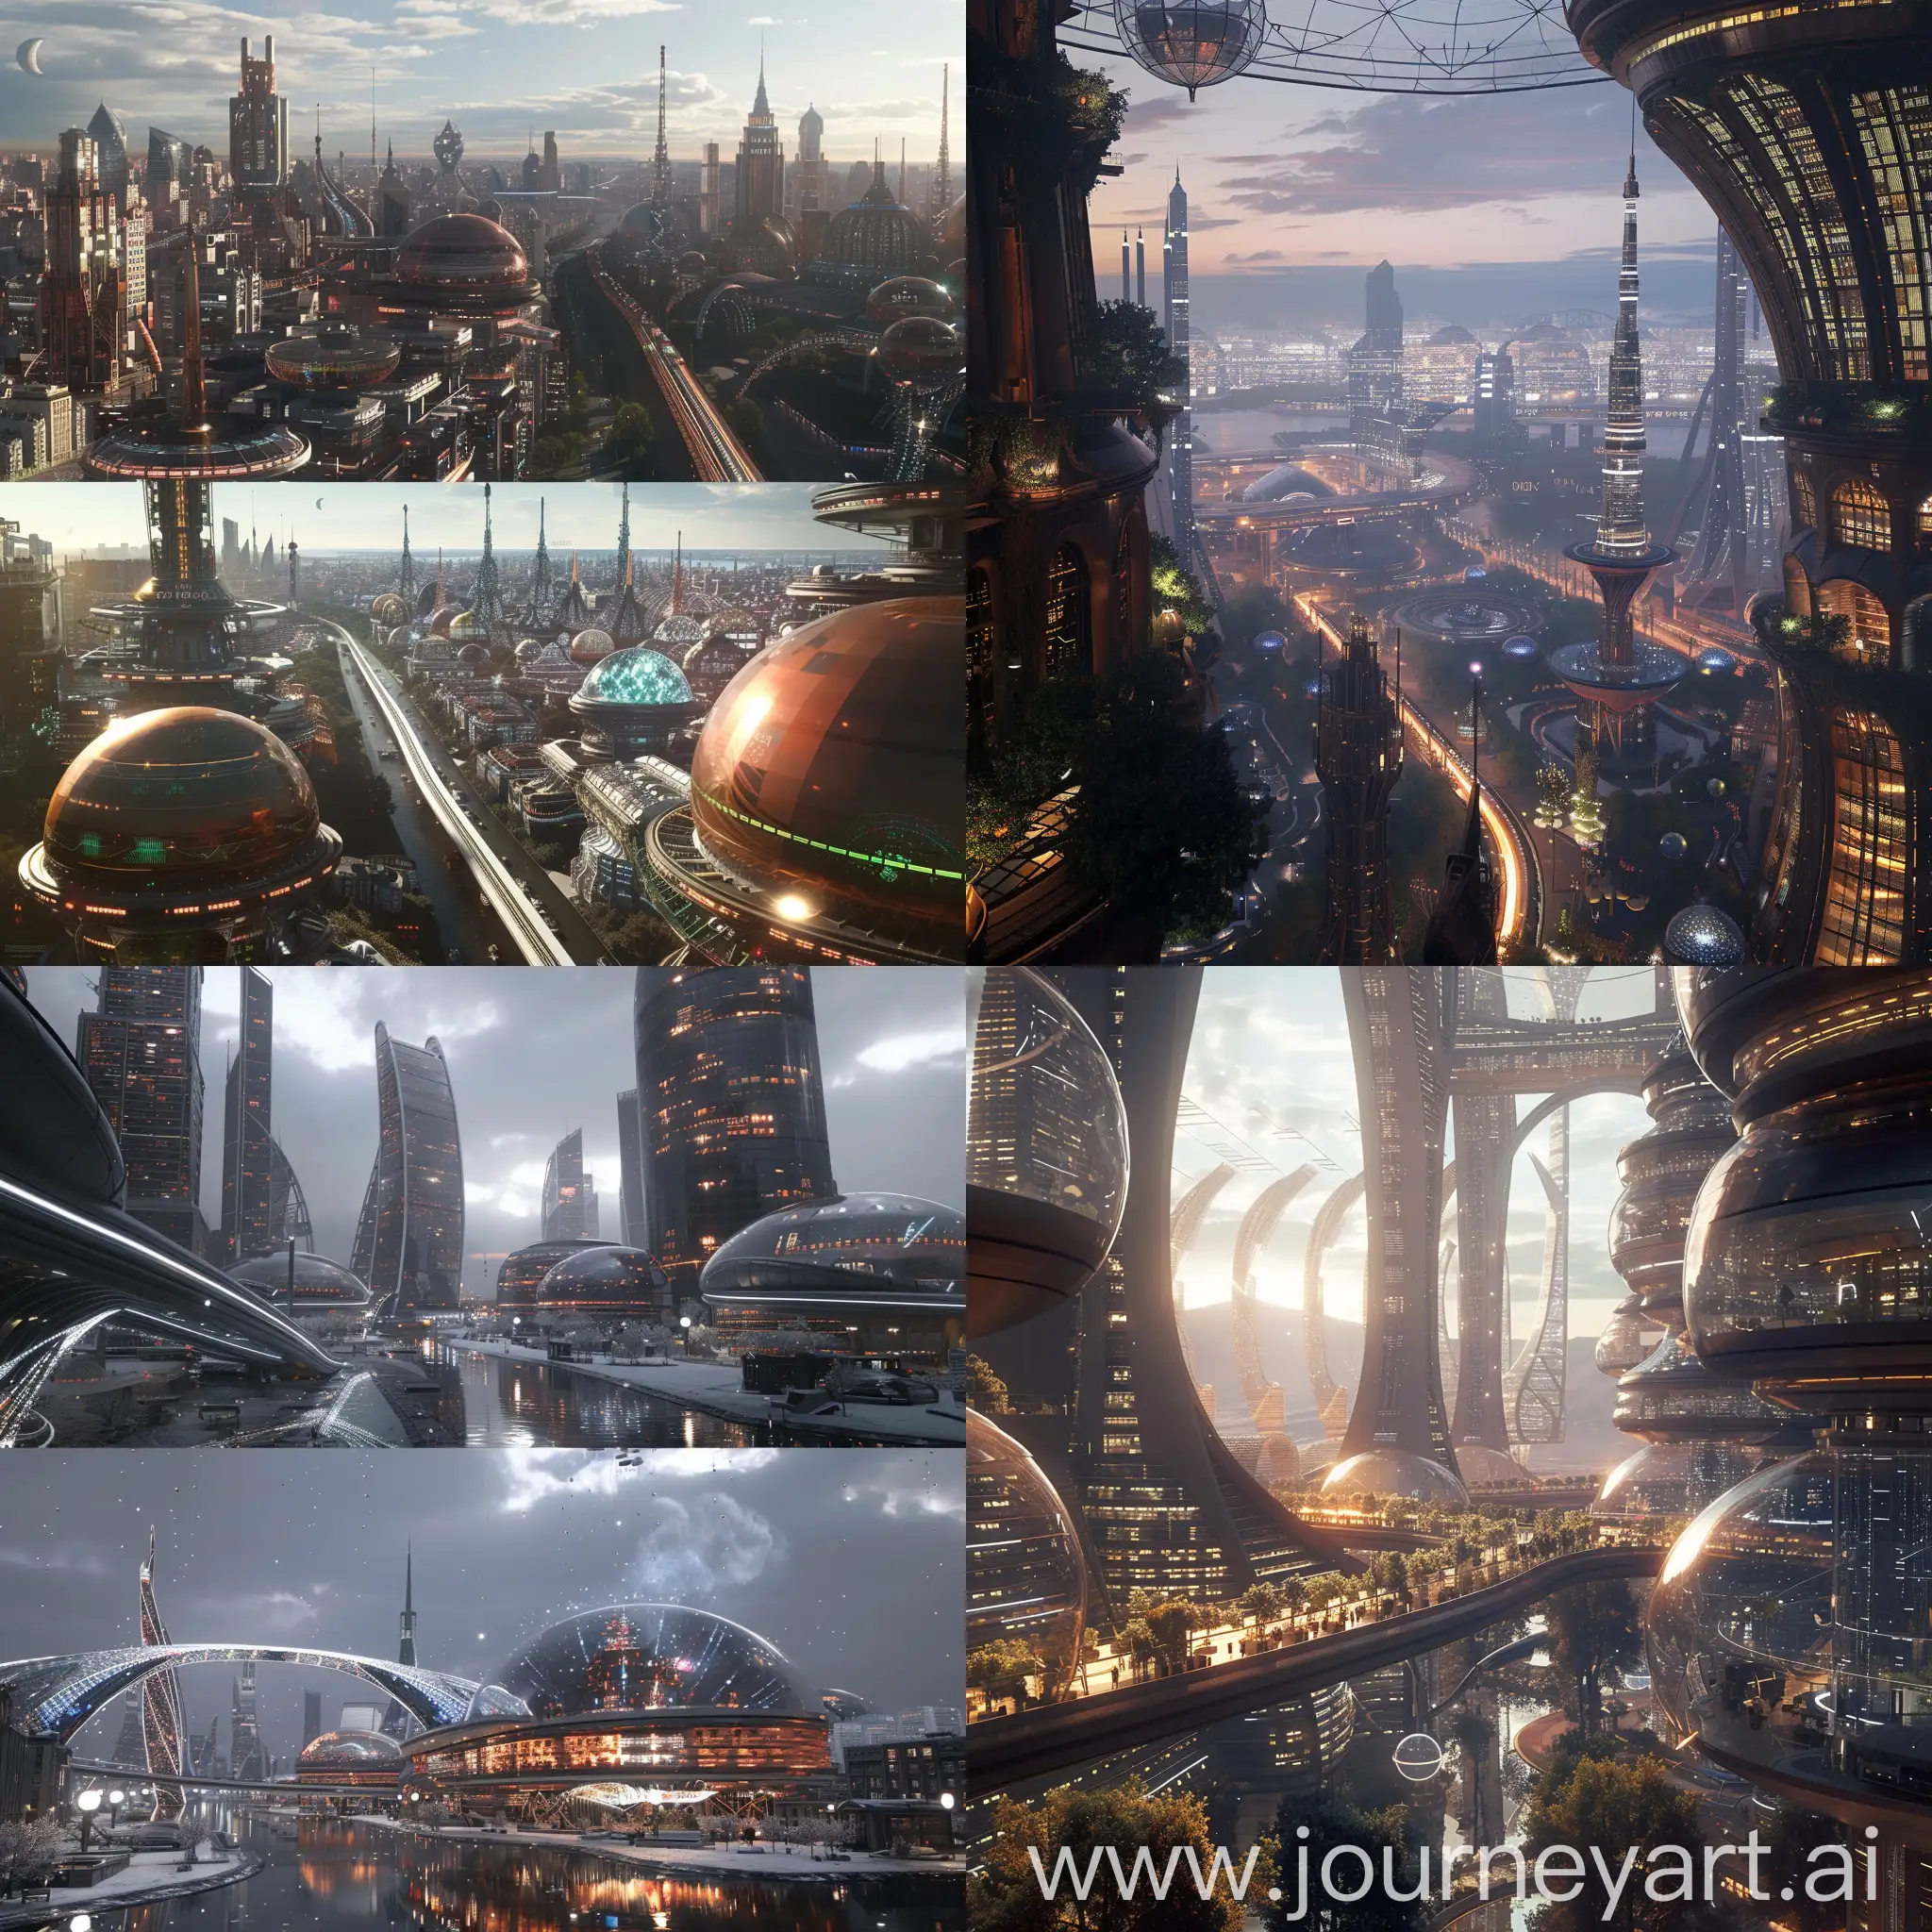 Futuristic Moscow, Metro-morphosis (Inception), Exogenesis Apartments (Elysium), Mnemonic Alleyways (Minority Report), Weather Weaver Domes (Cloud Atlas), Bioluminescent Botanical Gardens (Avatar), Dream Weaver Cafes (Paprika), Zero-G Parks (Passengers), Holo-Taxis (Blade Runner 2049), Kinetic Facades (Equilibrium), Symbiotic Streetlamps (Altered Carbon), Sky-piercing Megastructures (Snowpiercer), Kinetic Cathedrals (The Fountain), Hyperloop Highways (Primer), Weather-responsive Skins (Annihilation), Augmented Reality Skylines (A Scanner Darkly), Vertical Farmscrapers (Elysium), Modular Homescapes (Cloud Atlas), *Adaptive Archways (Arrival), Bioluminescent Waterways (Prometheus), Nanotech Reinforced Towers (Pacific Rim), unreal engine 5 --stylize 1000